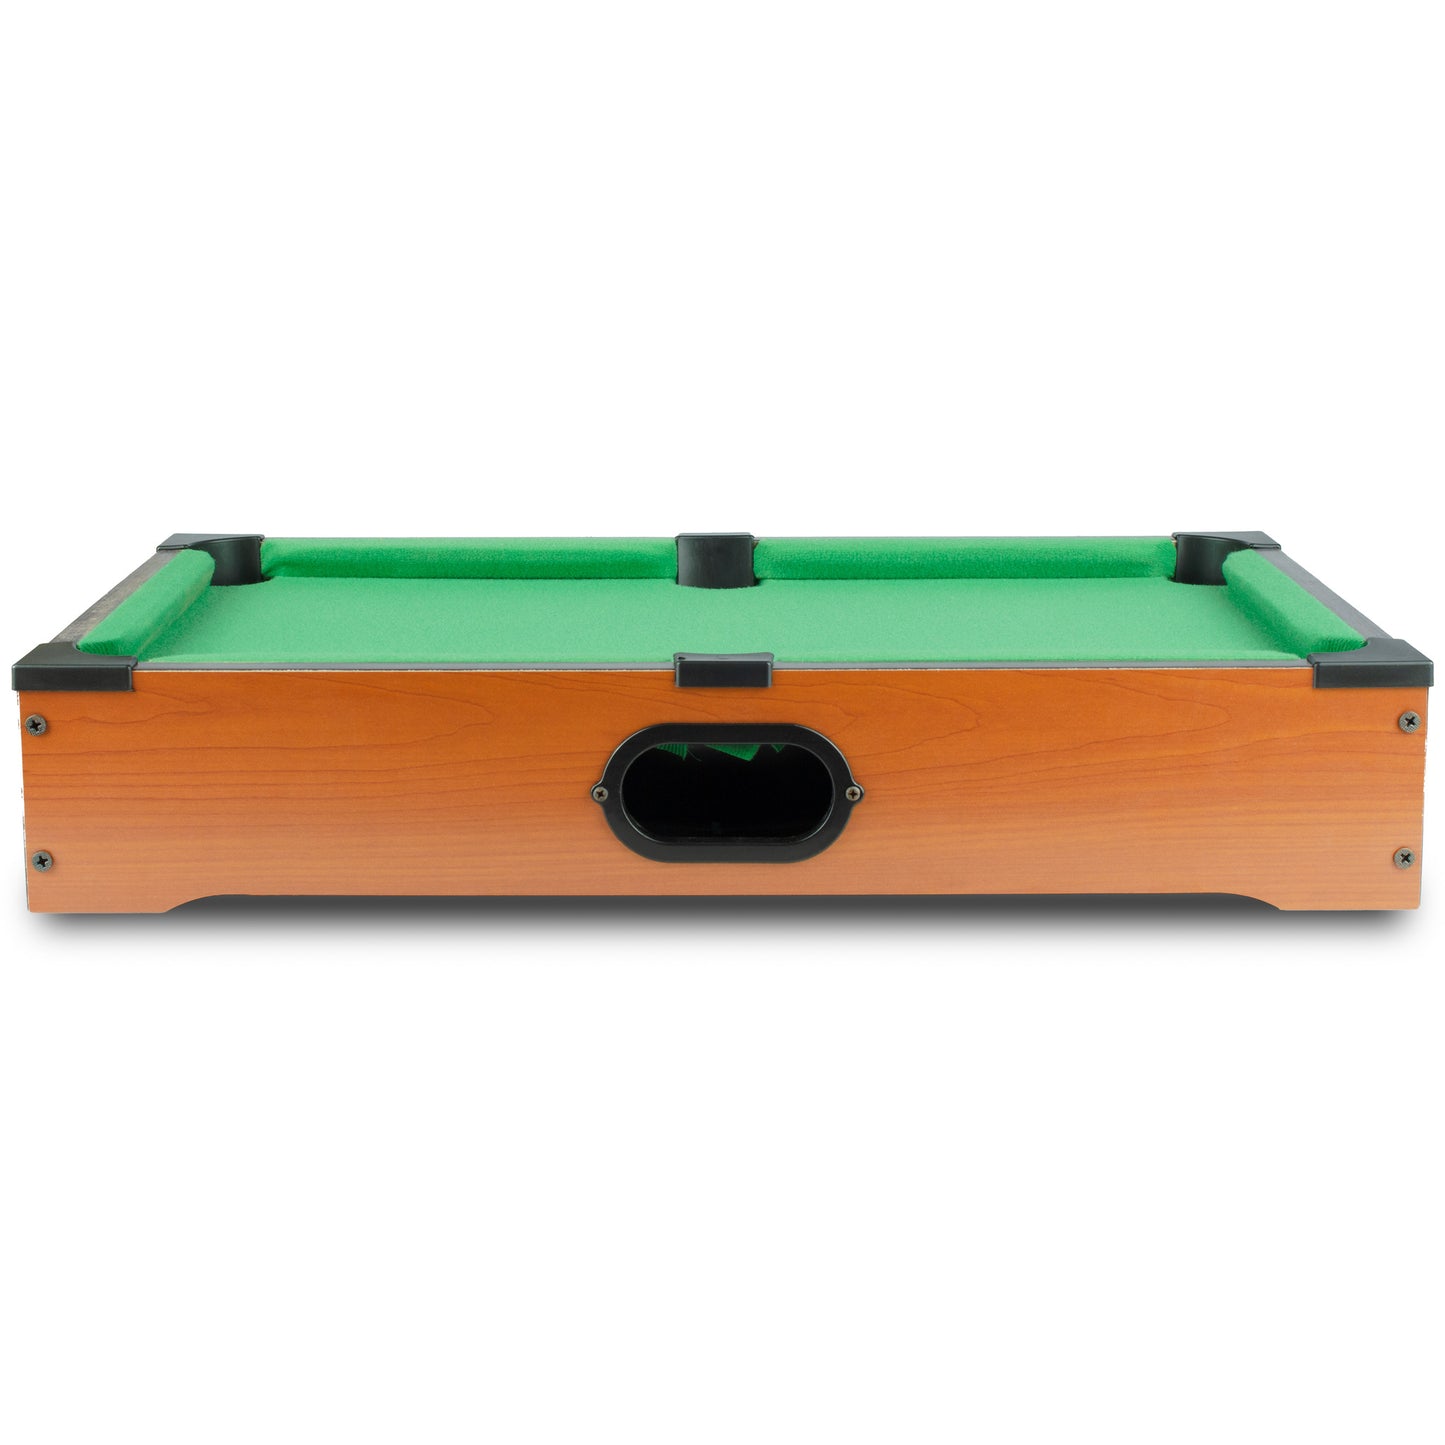 Miniature Pool Table Set - Compact Billiards Fun for Kids and Adults tynimo